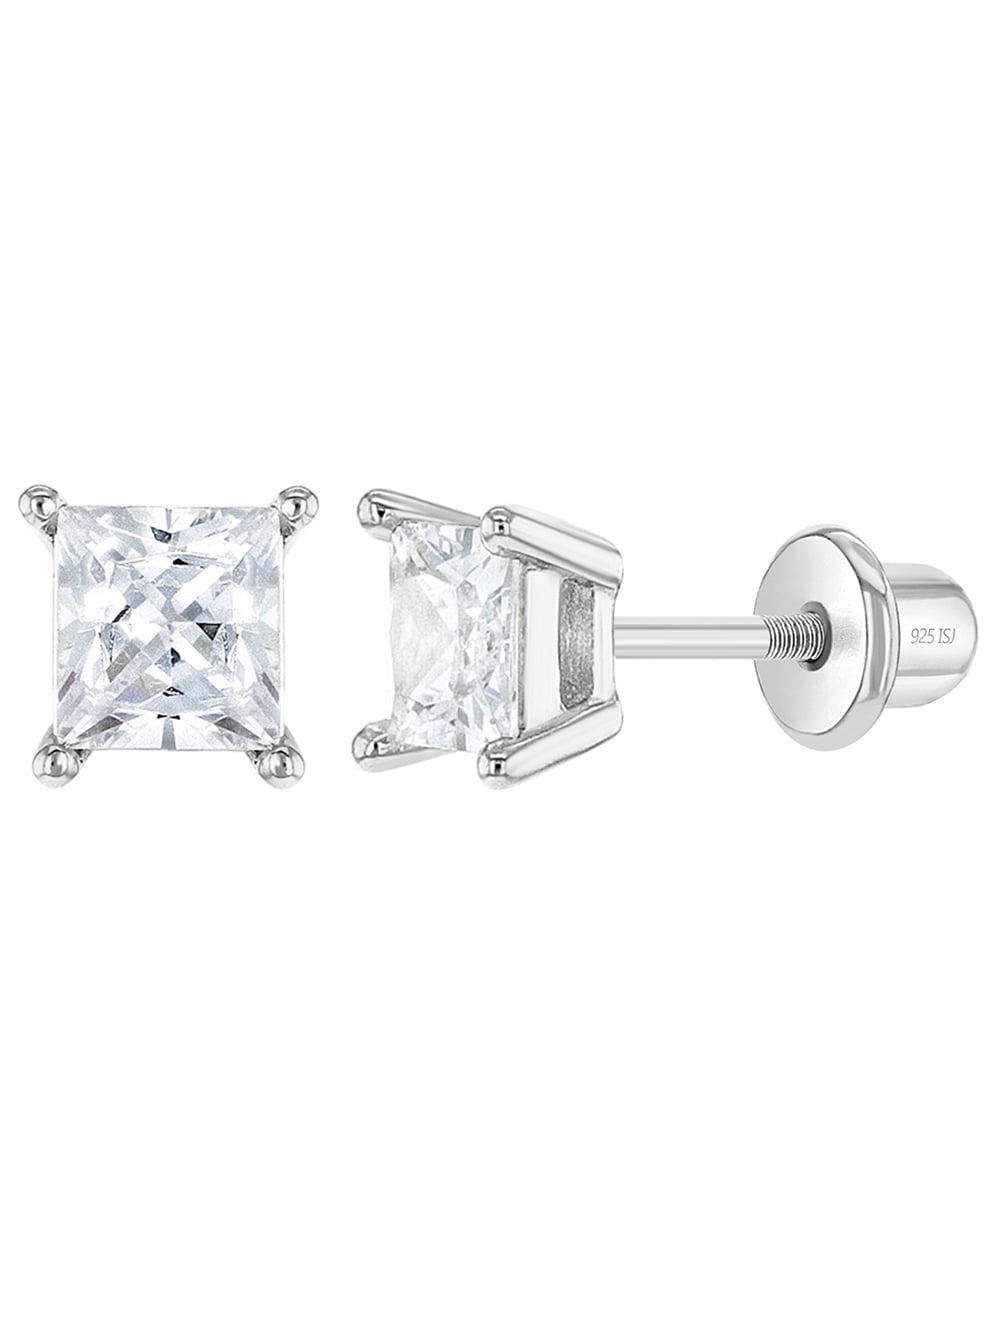 FB Jewels Solid Stainless Steel Polished Square CZ Cubic Zirconia Post Earrings